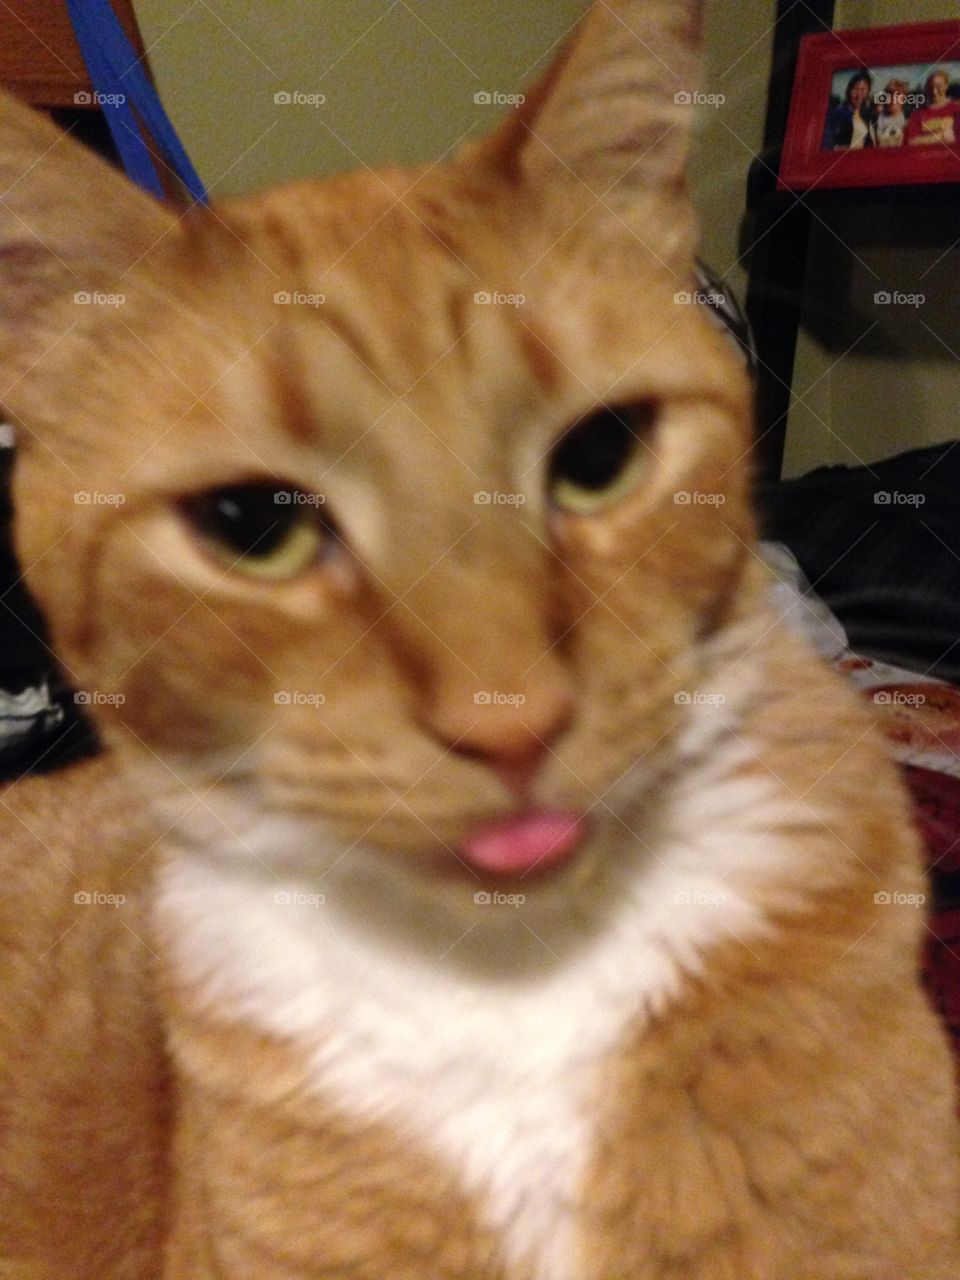 Kitty sticking his tongue out